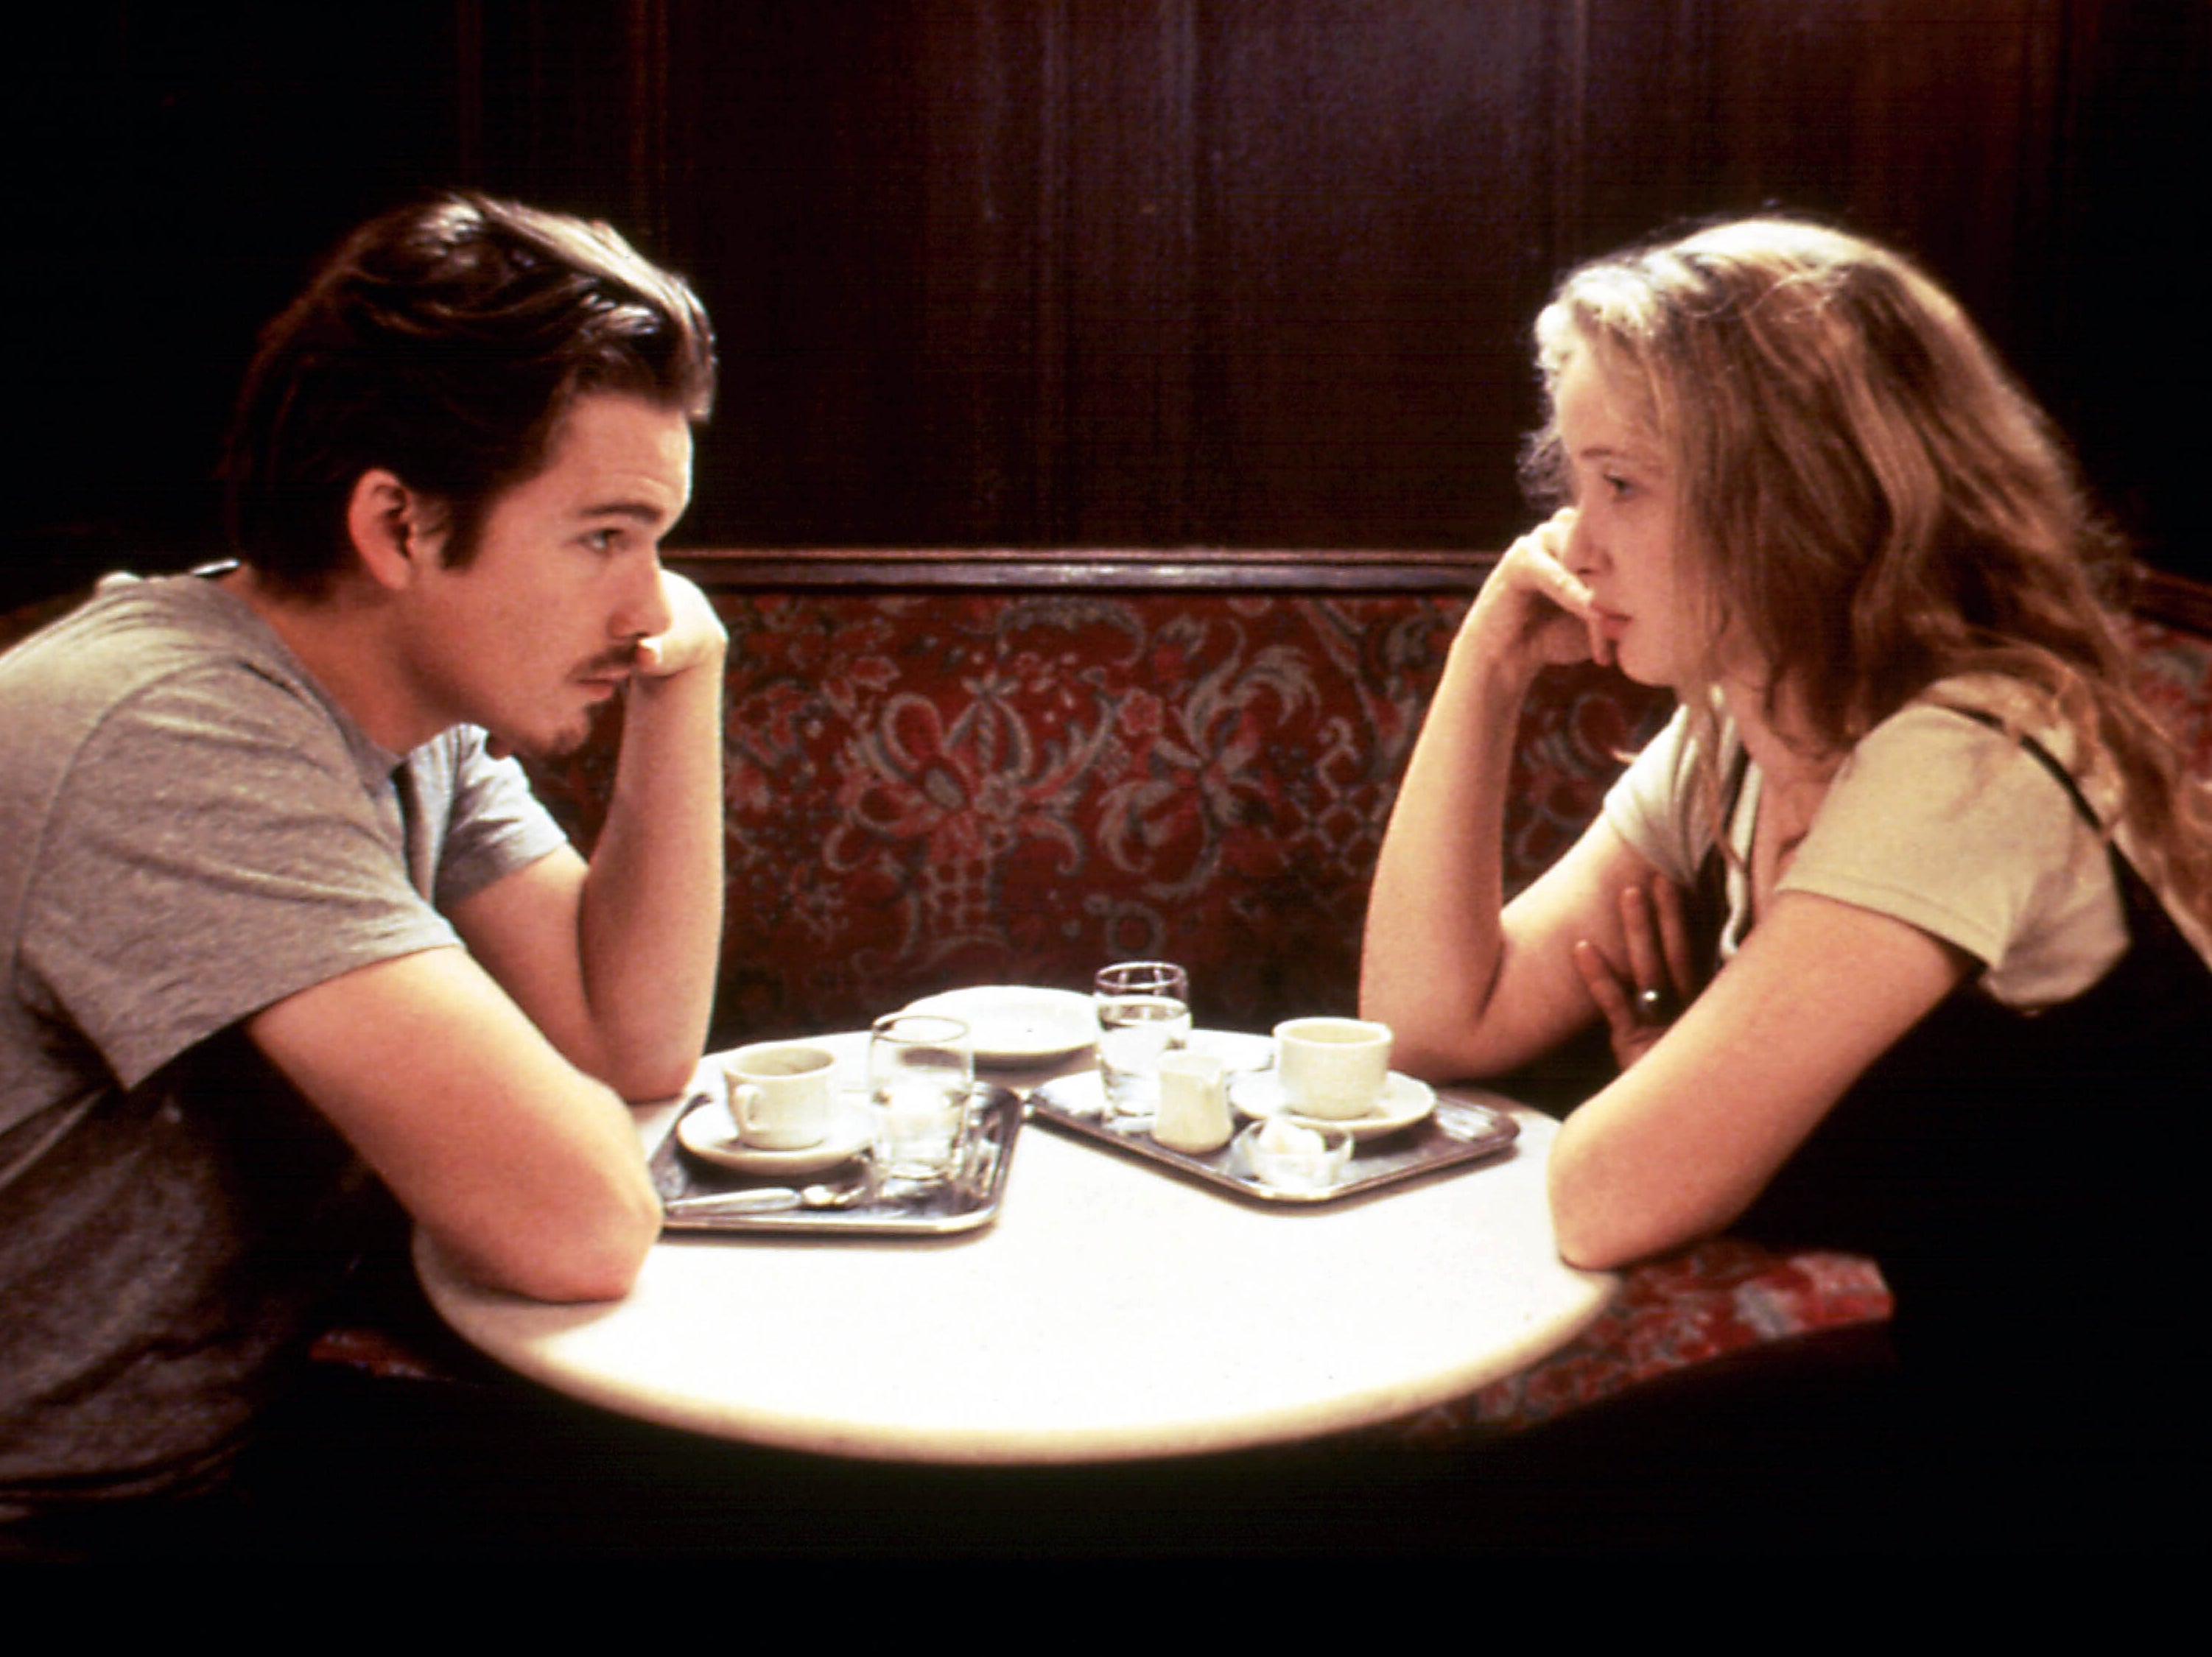 Hawke and Delpy in ‘Before Sunrise’